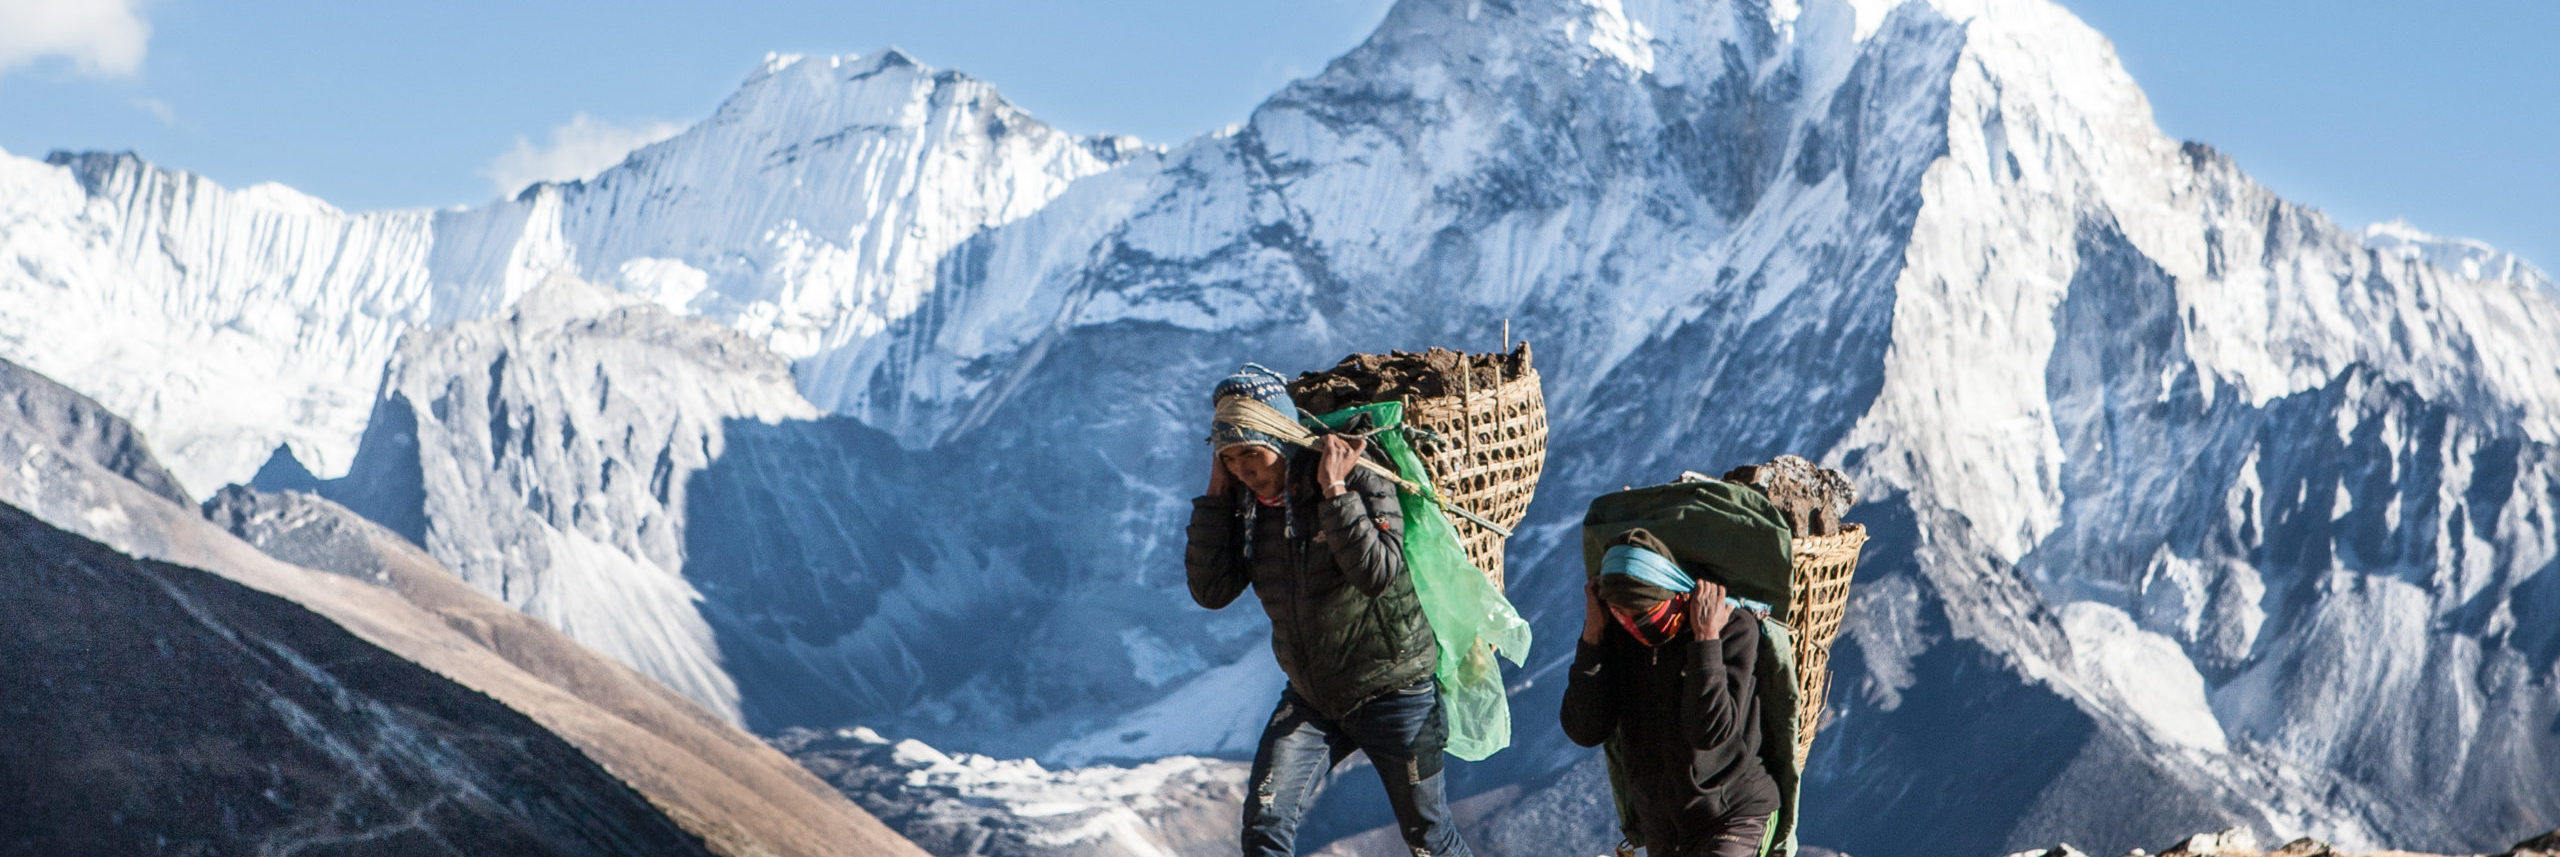 Sherpas carrying load